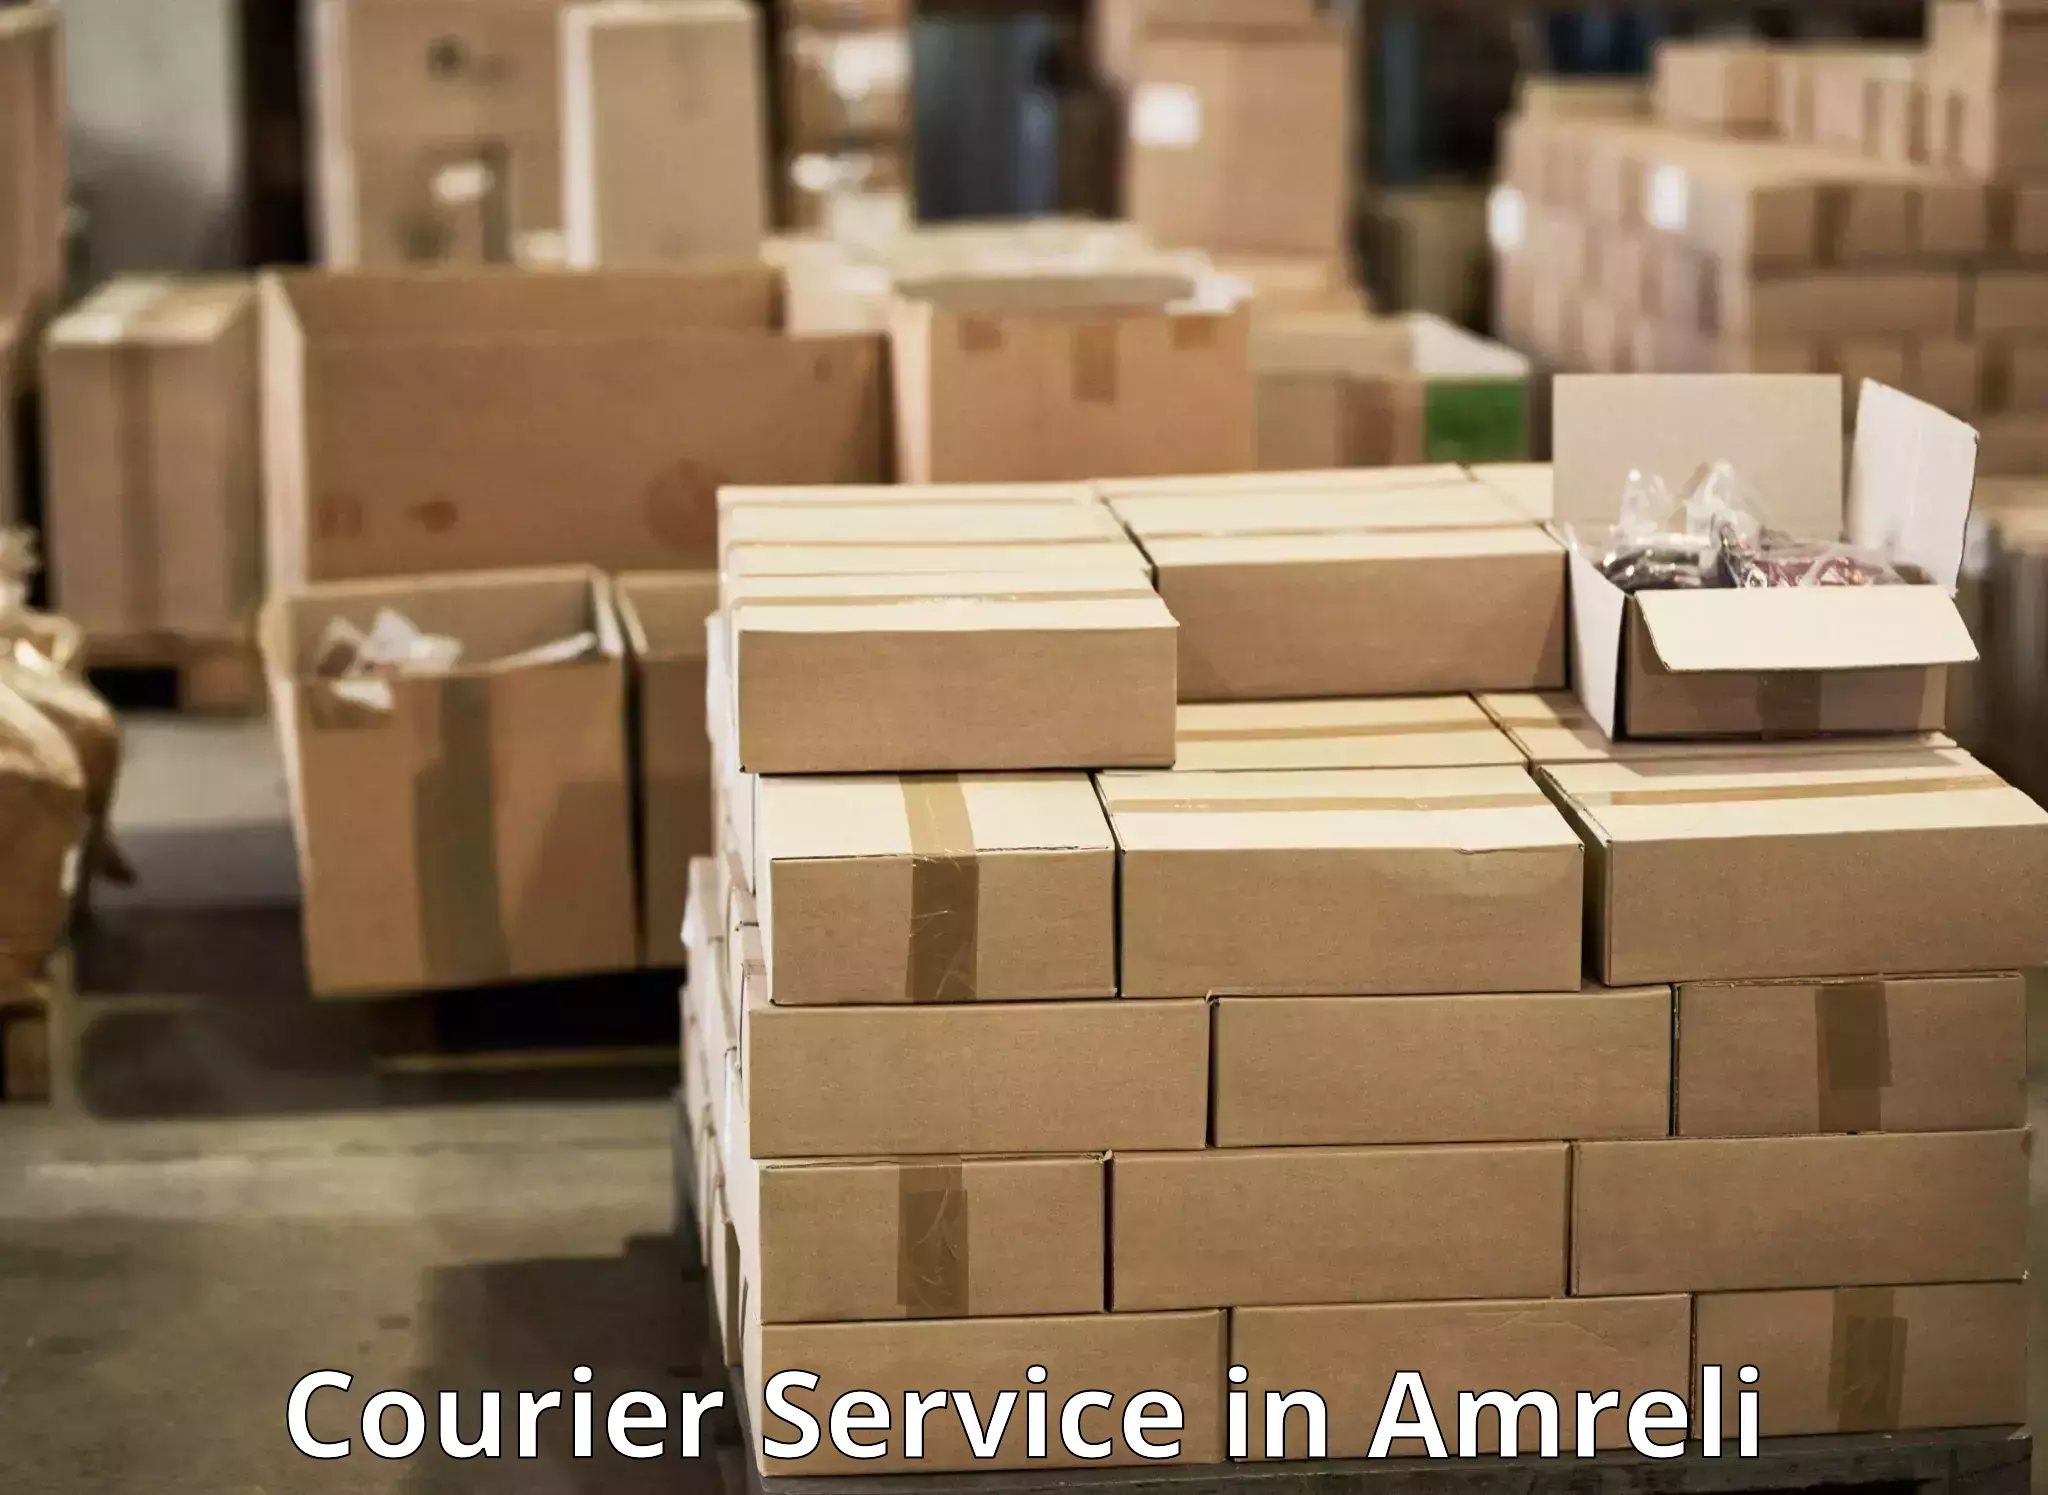 Express package services in Amreli